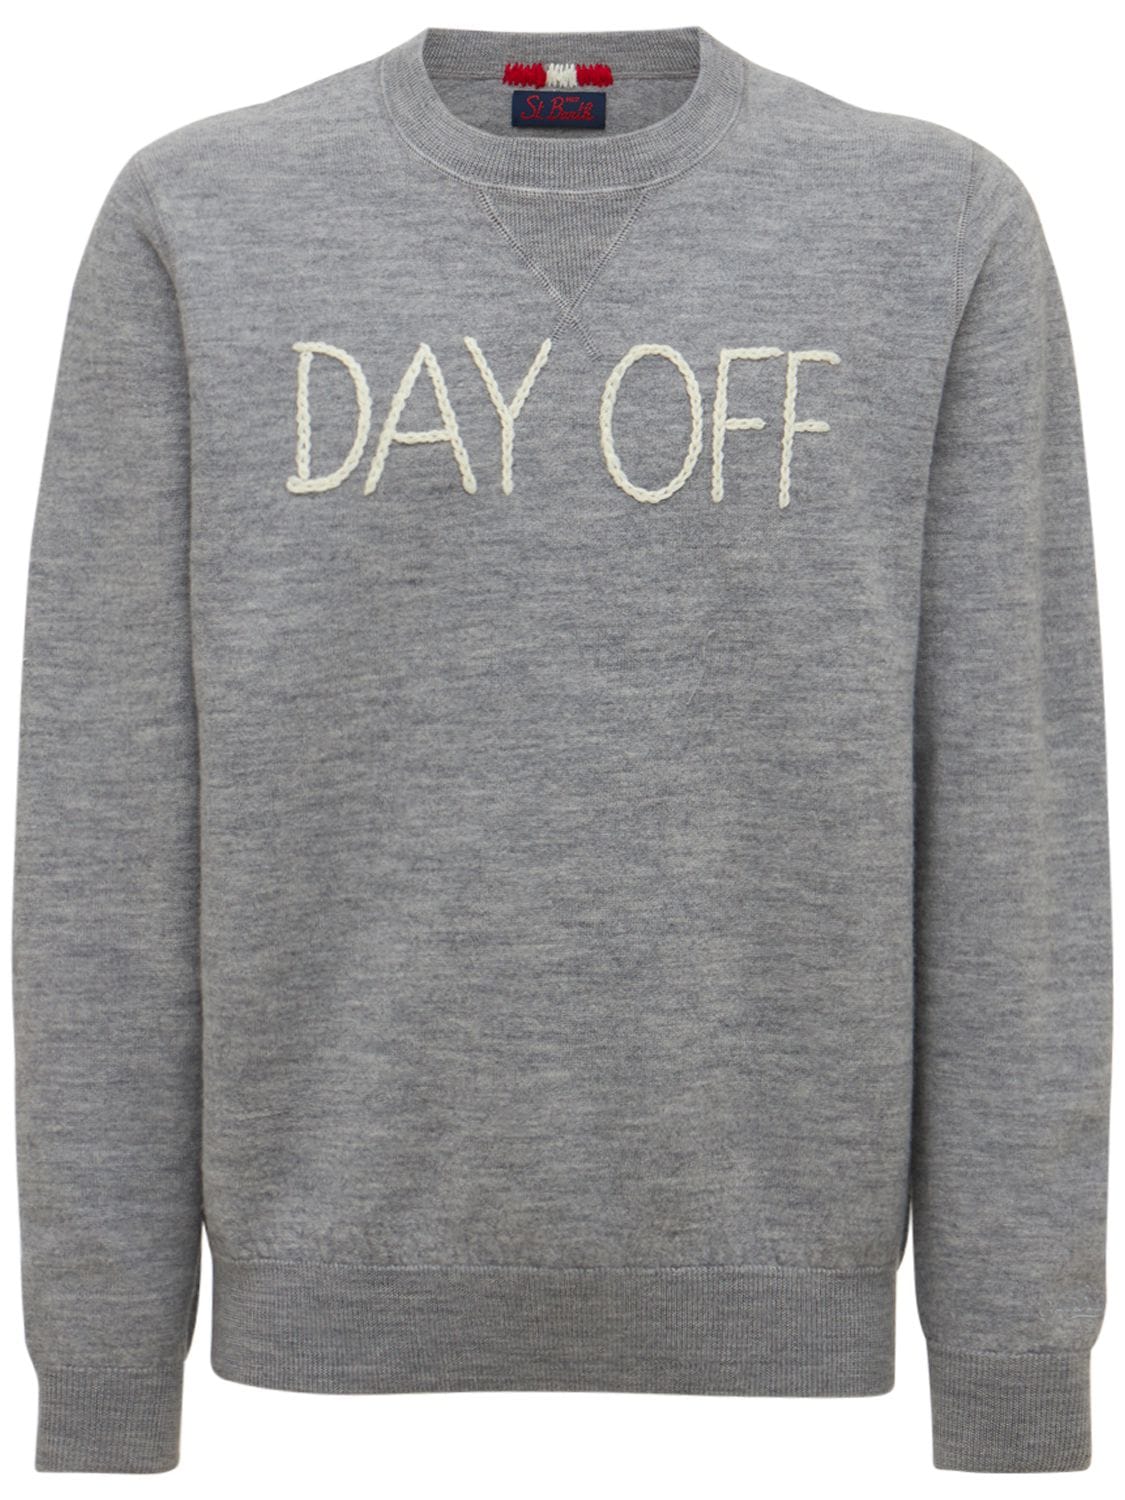 Day Off Embroidered Wool Knit Sweater